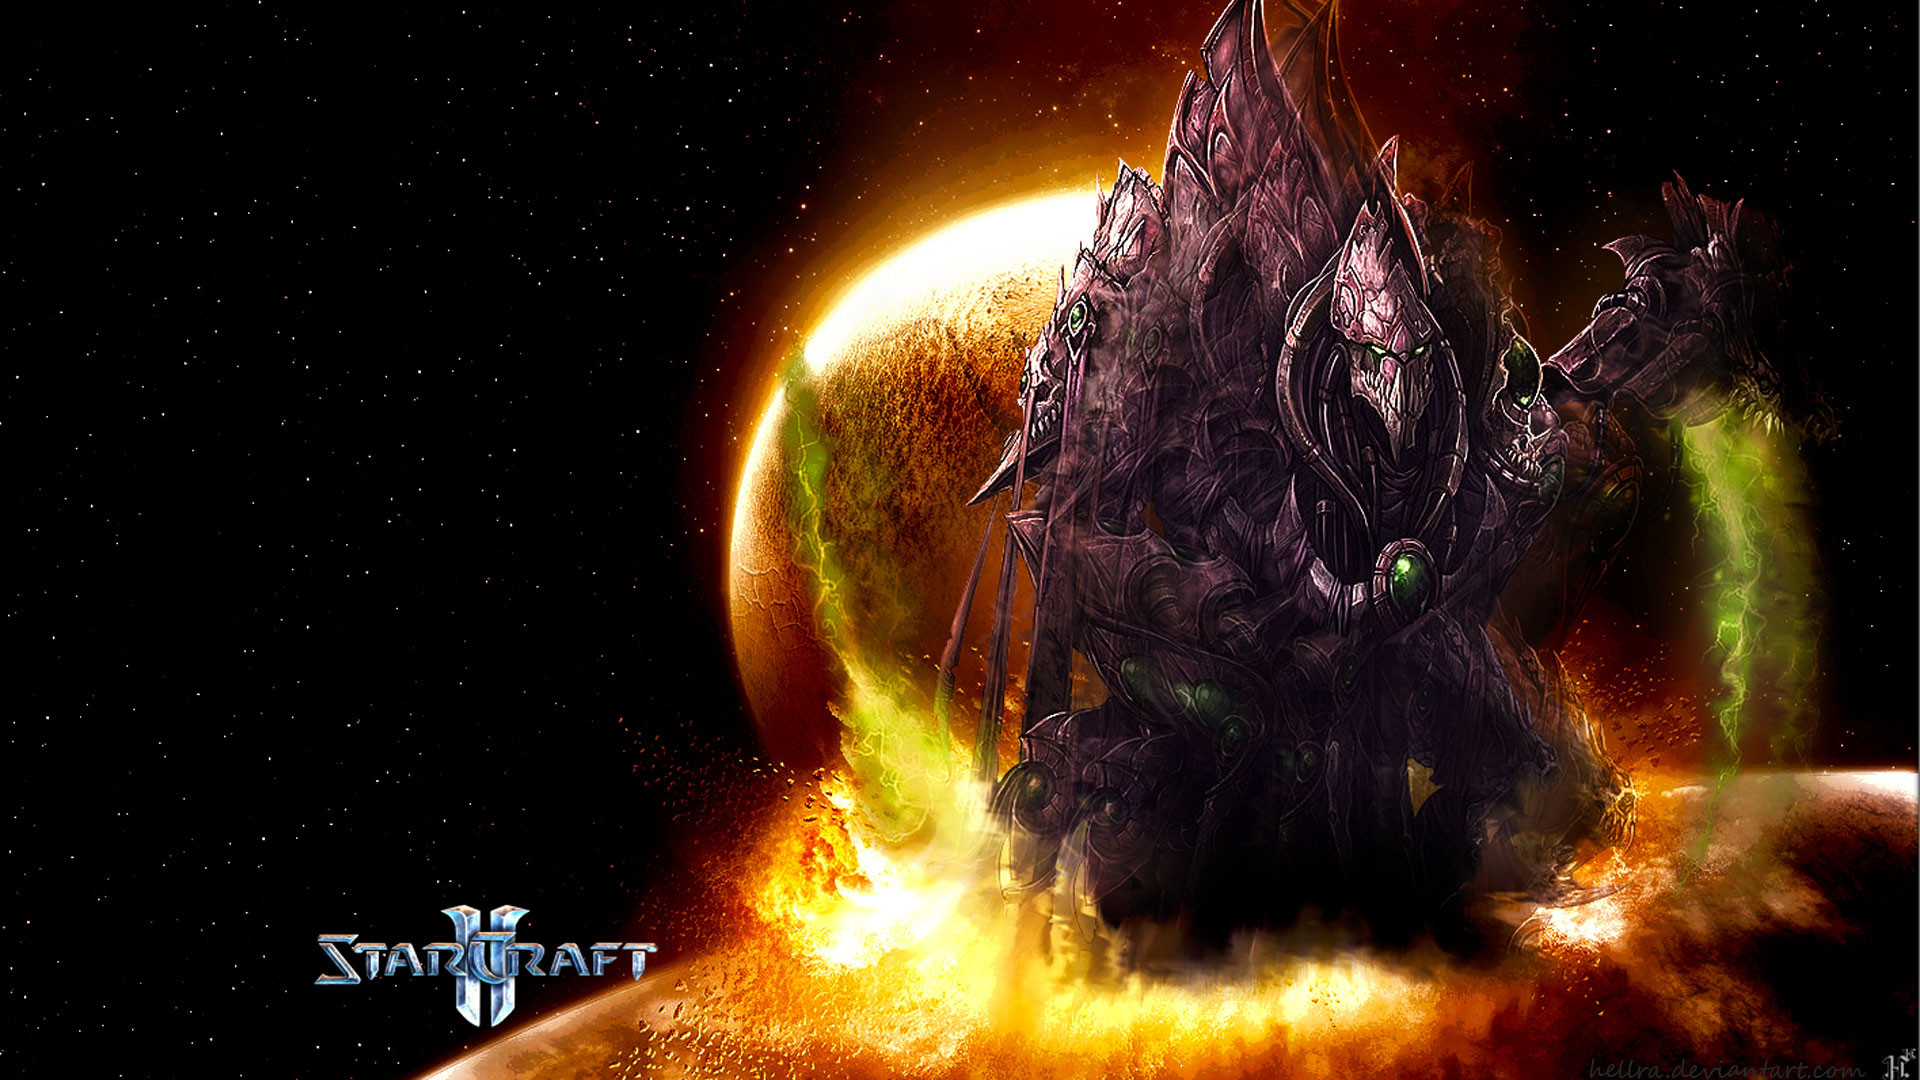 1920x1080 High Resolution Game Starcraft 2 Zerg Wallpapers HD 6 Full Size .